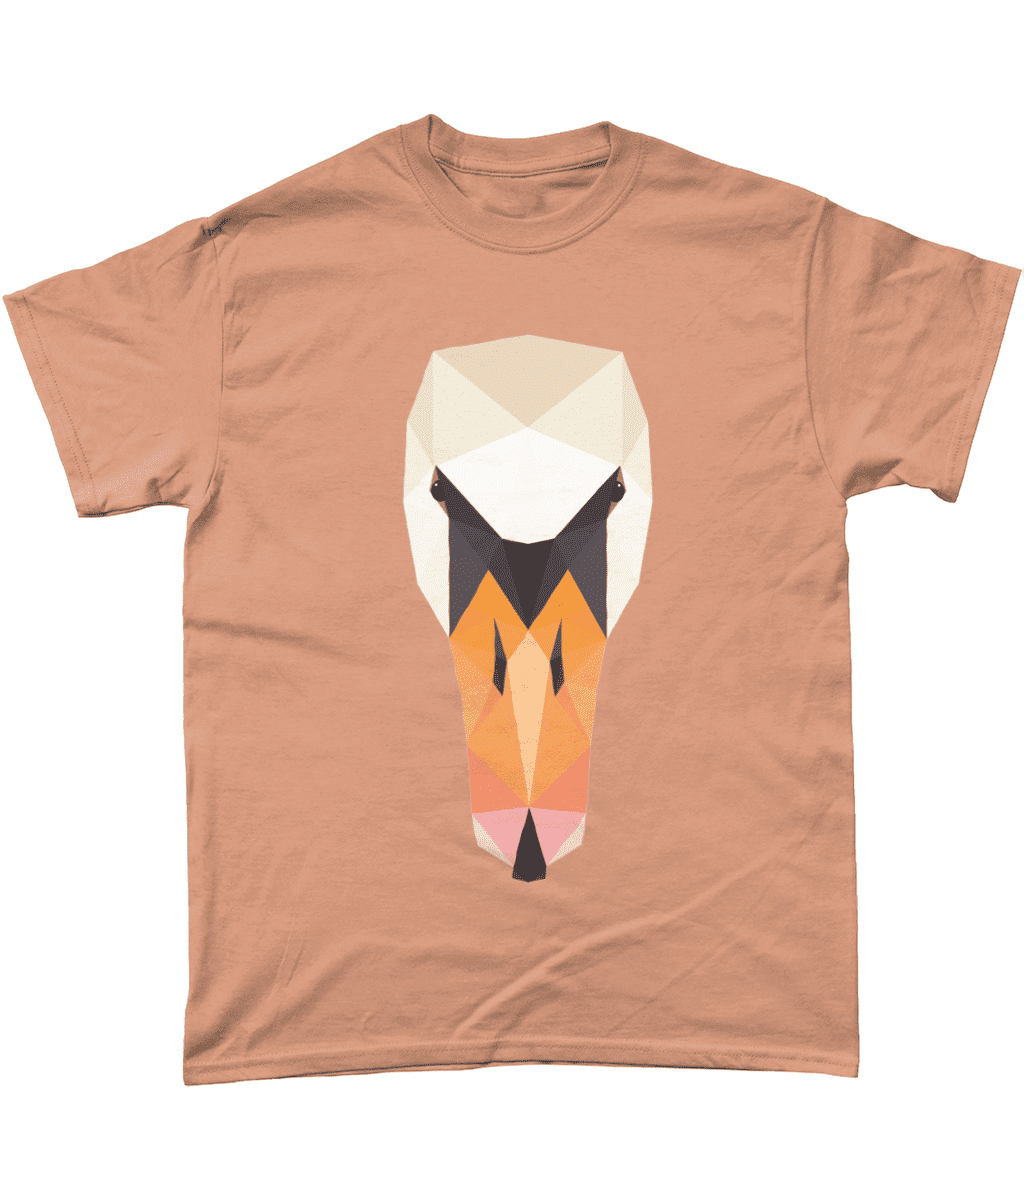 Low Poly Swan T Shirt Old Gold